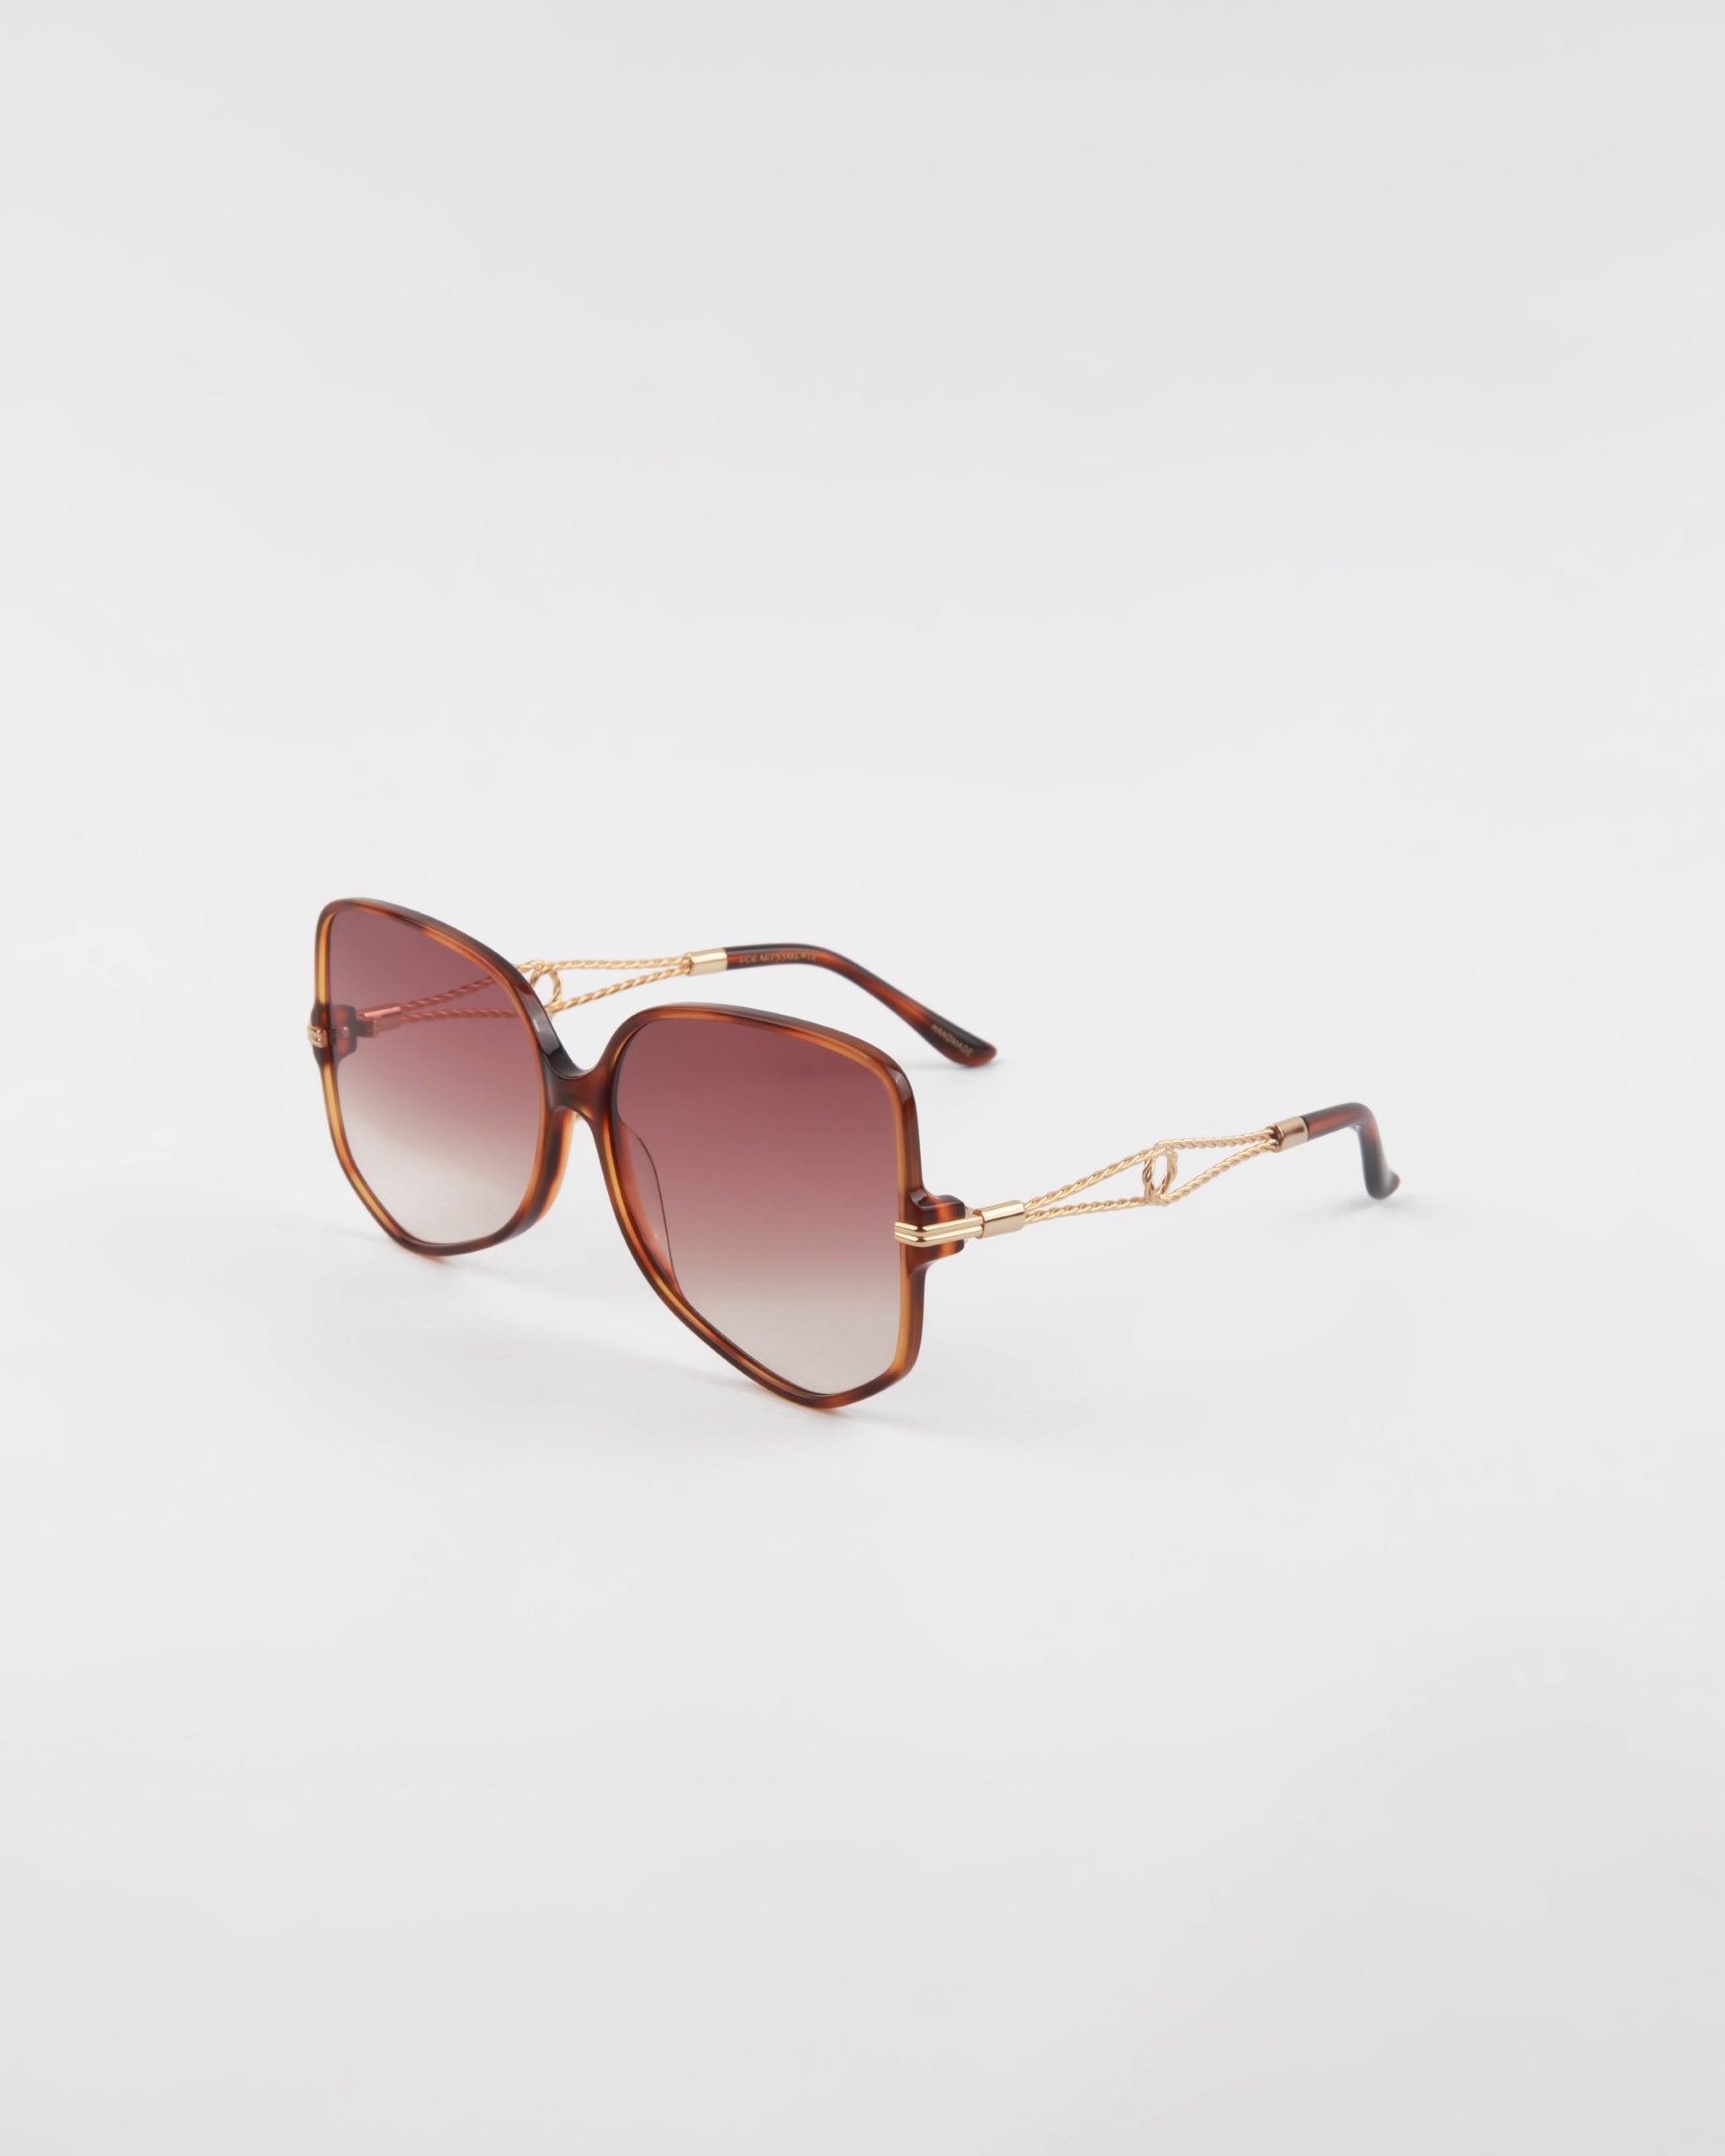 A pair of stylish, oversized Voyager sunglasses with gradient lenses and gold-plated frames by For Art&#39;s Sake®. The translucent brown temples and arms feature elegant gold accents. Handmade acetate eyewear offering optimal UVA &amp; UVB protection, showcased against a plain, white background.